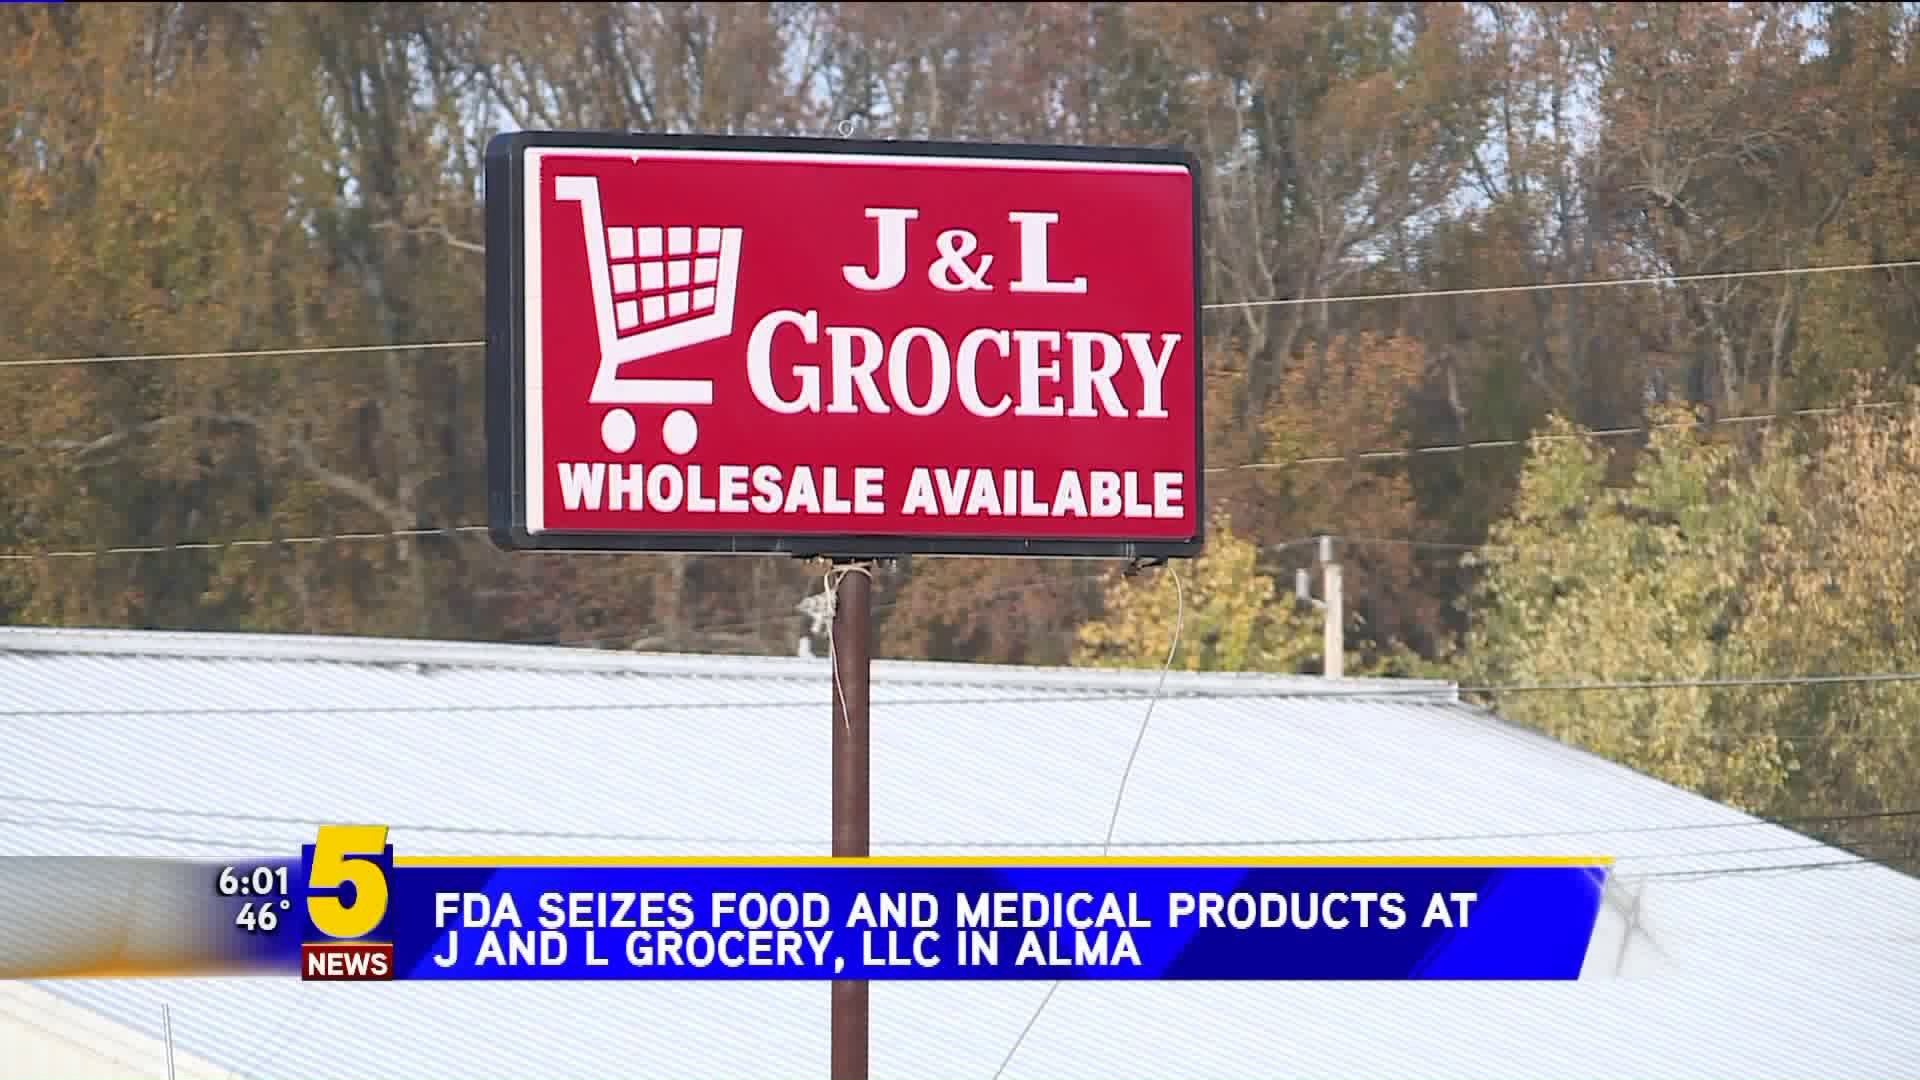 FDA Seizes Food & Medical Products From J & L Grocery In Alma